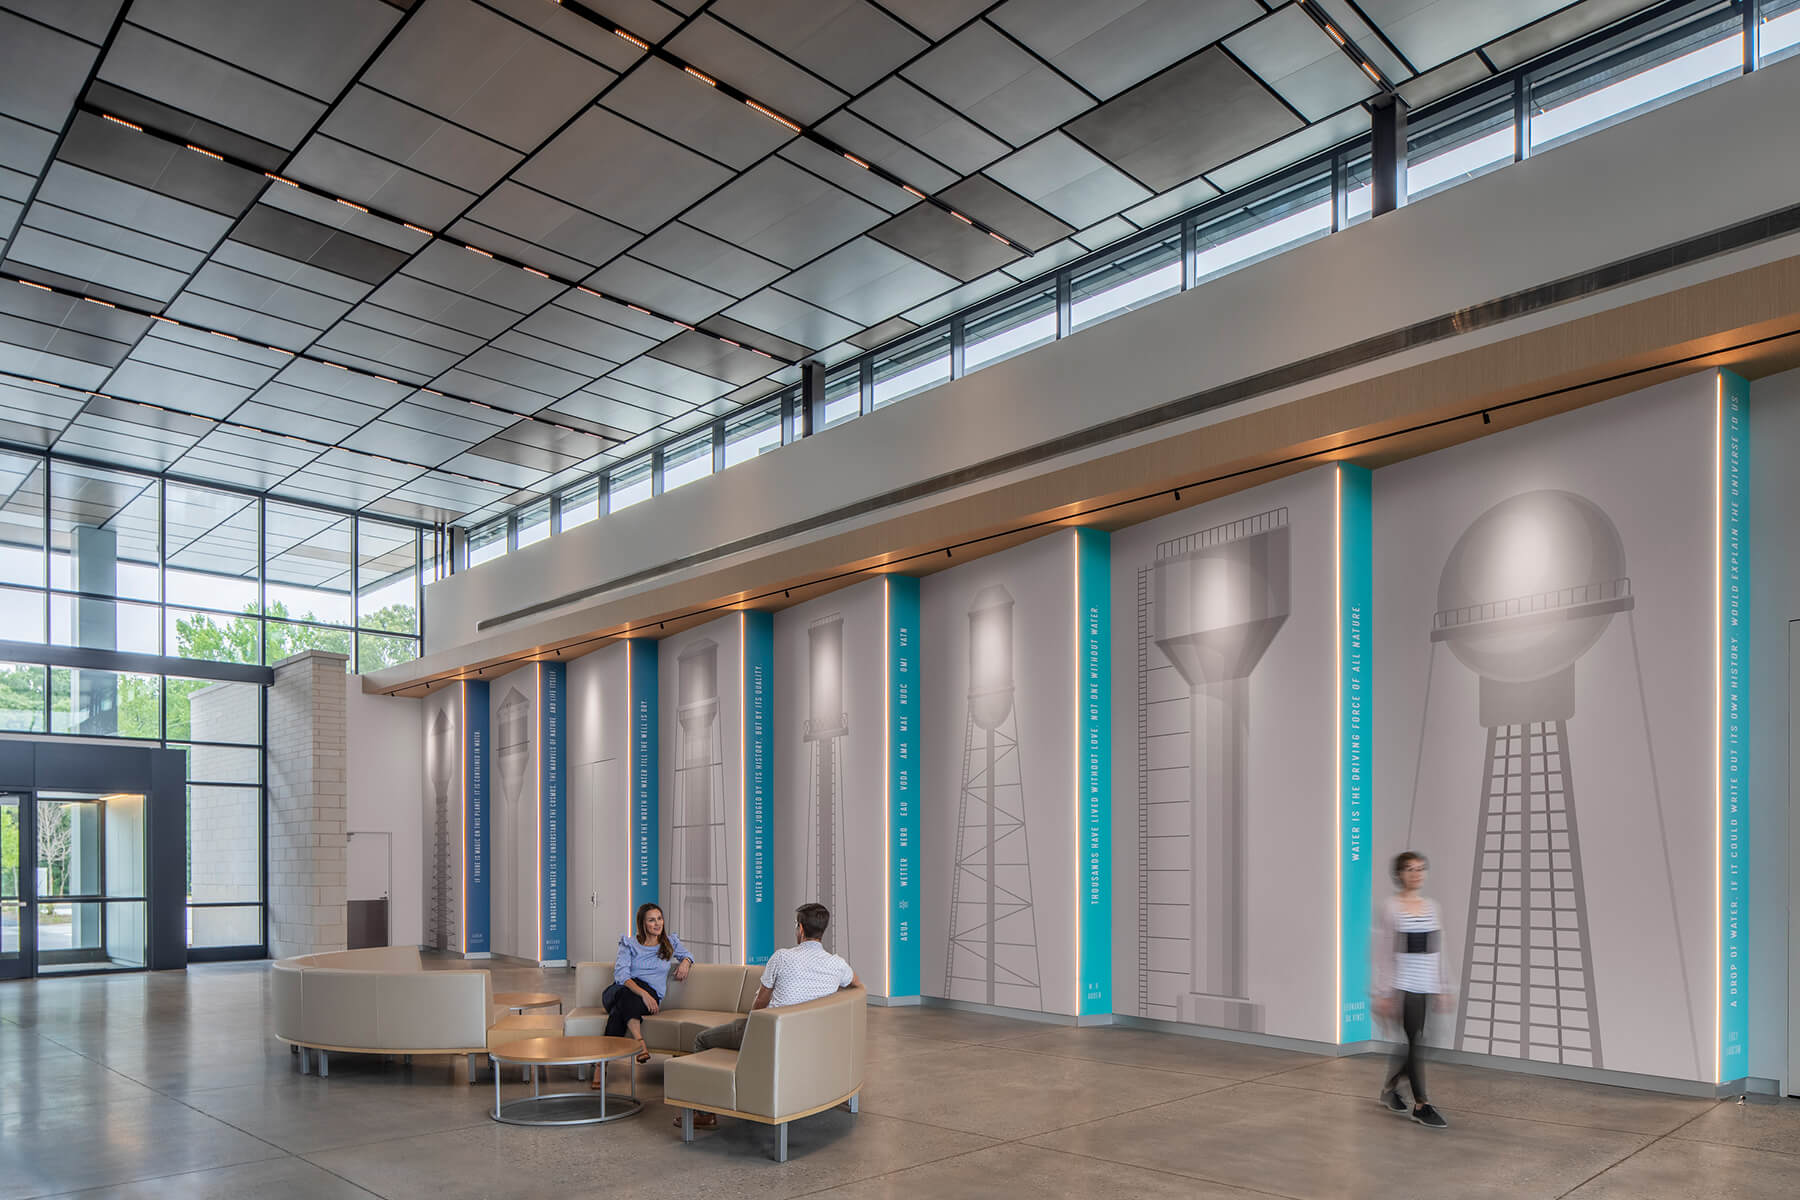 Lobby area of The Water Tower Global Innovation Hub featuring water tower renderings